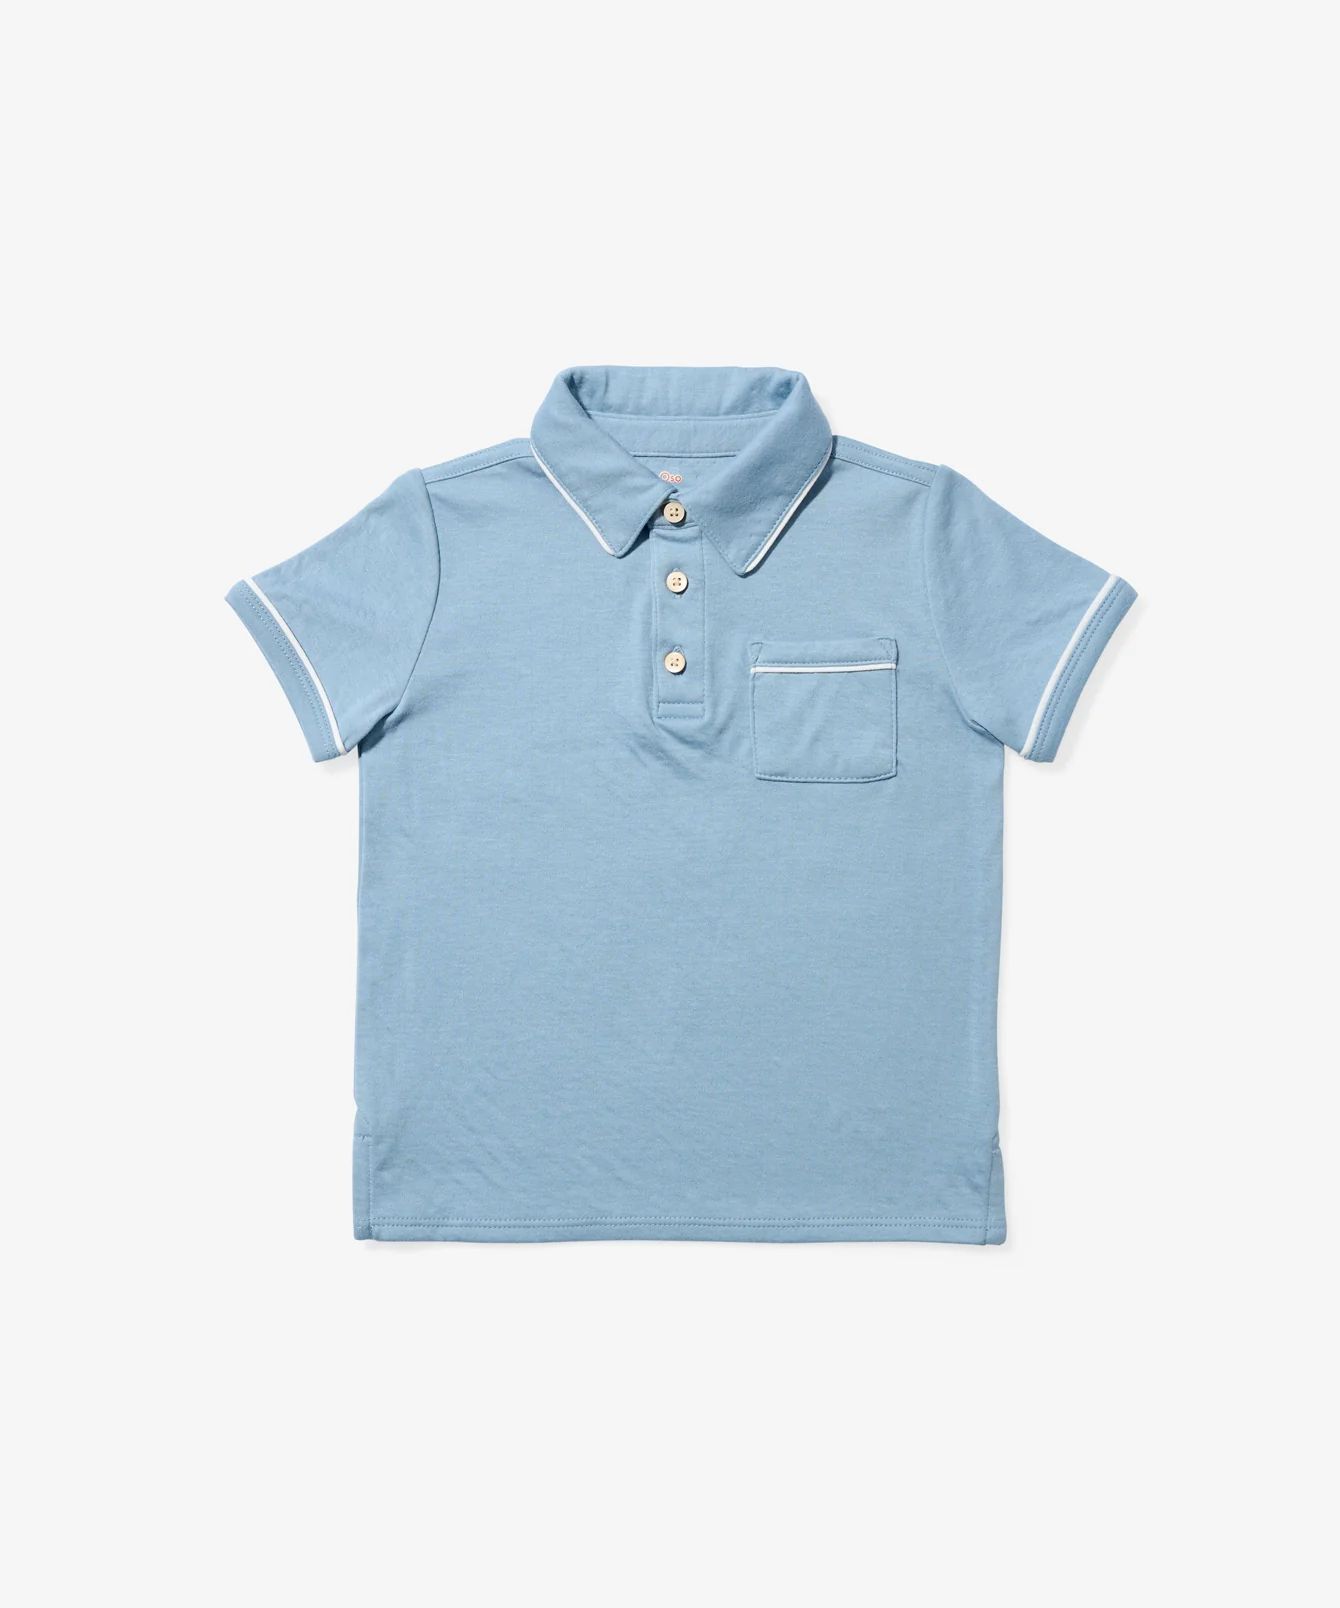 The Perfect Polo Shirt for Boy or Girls | Oso and Me | Oso & Me